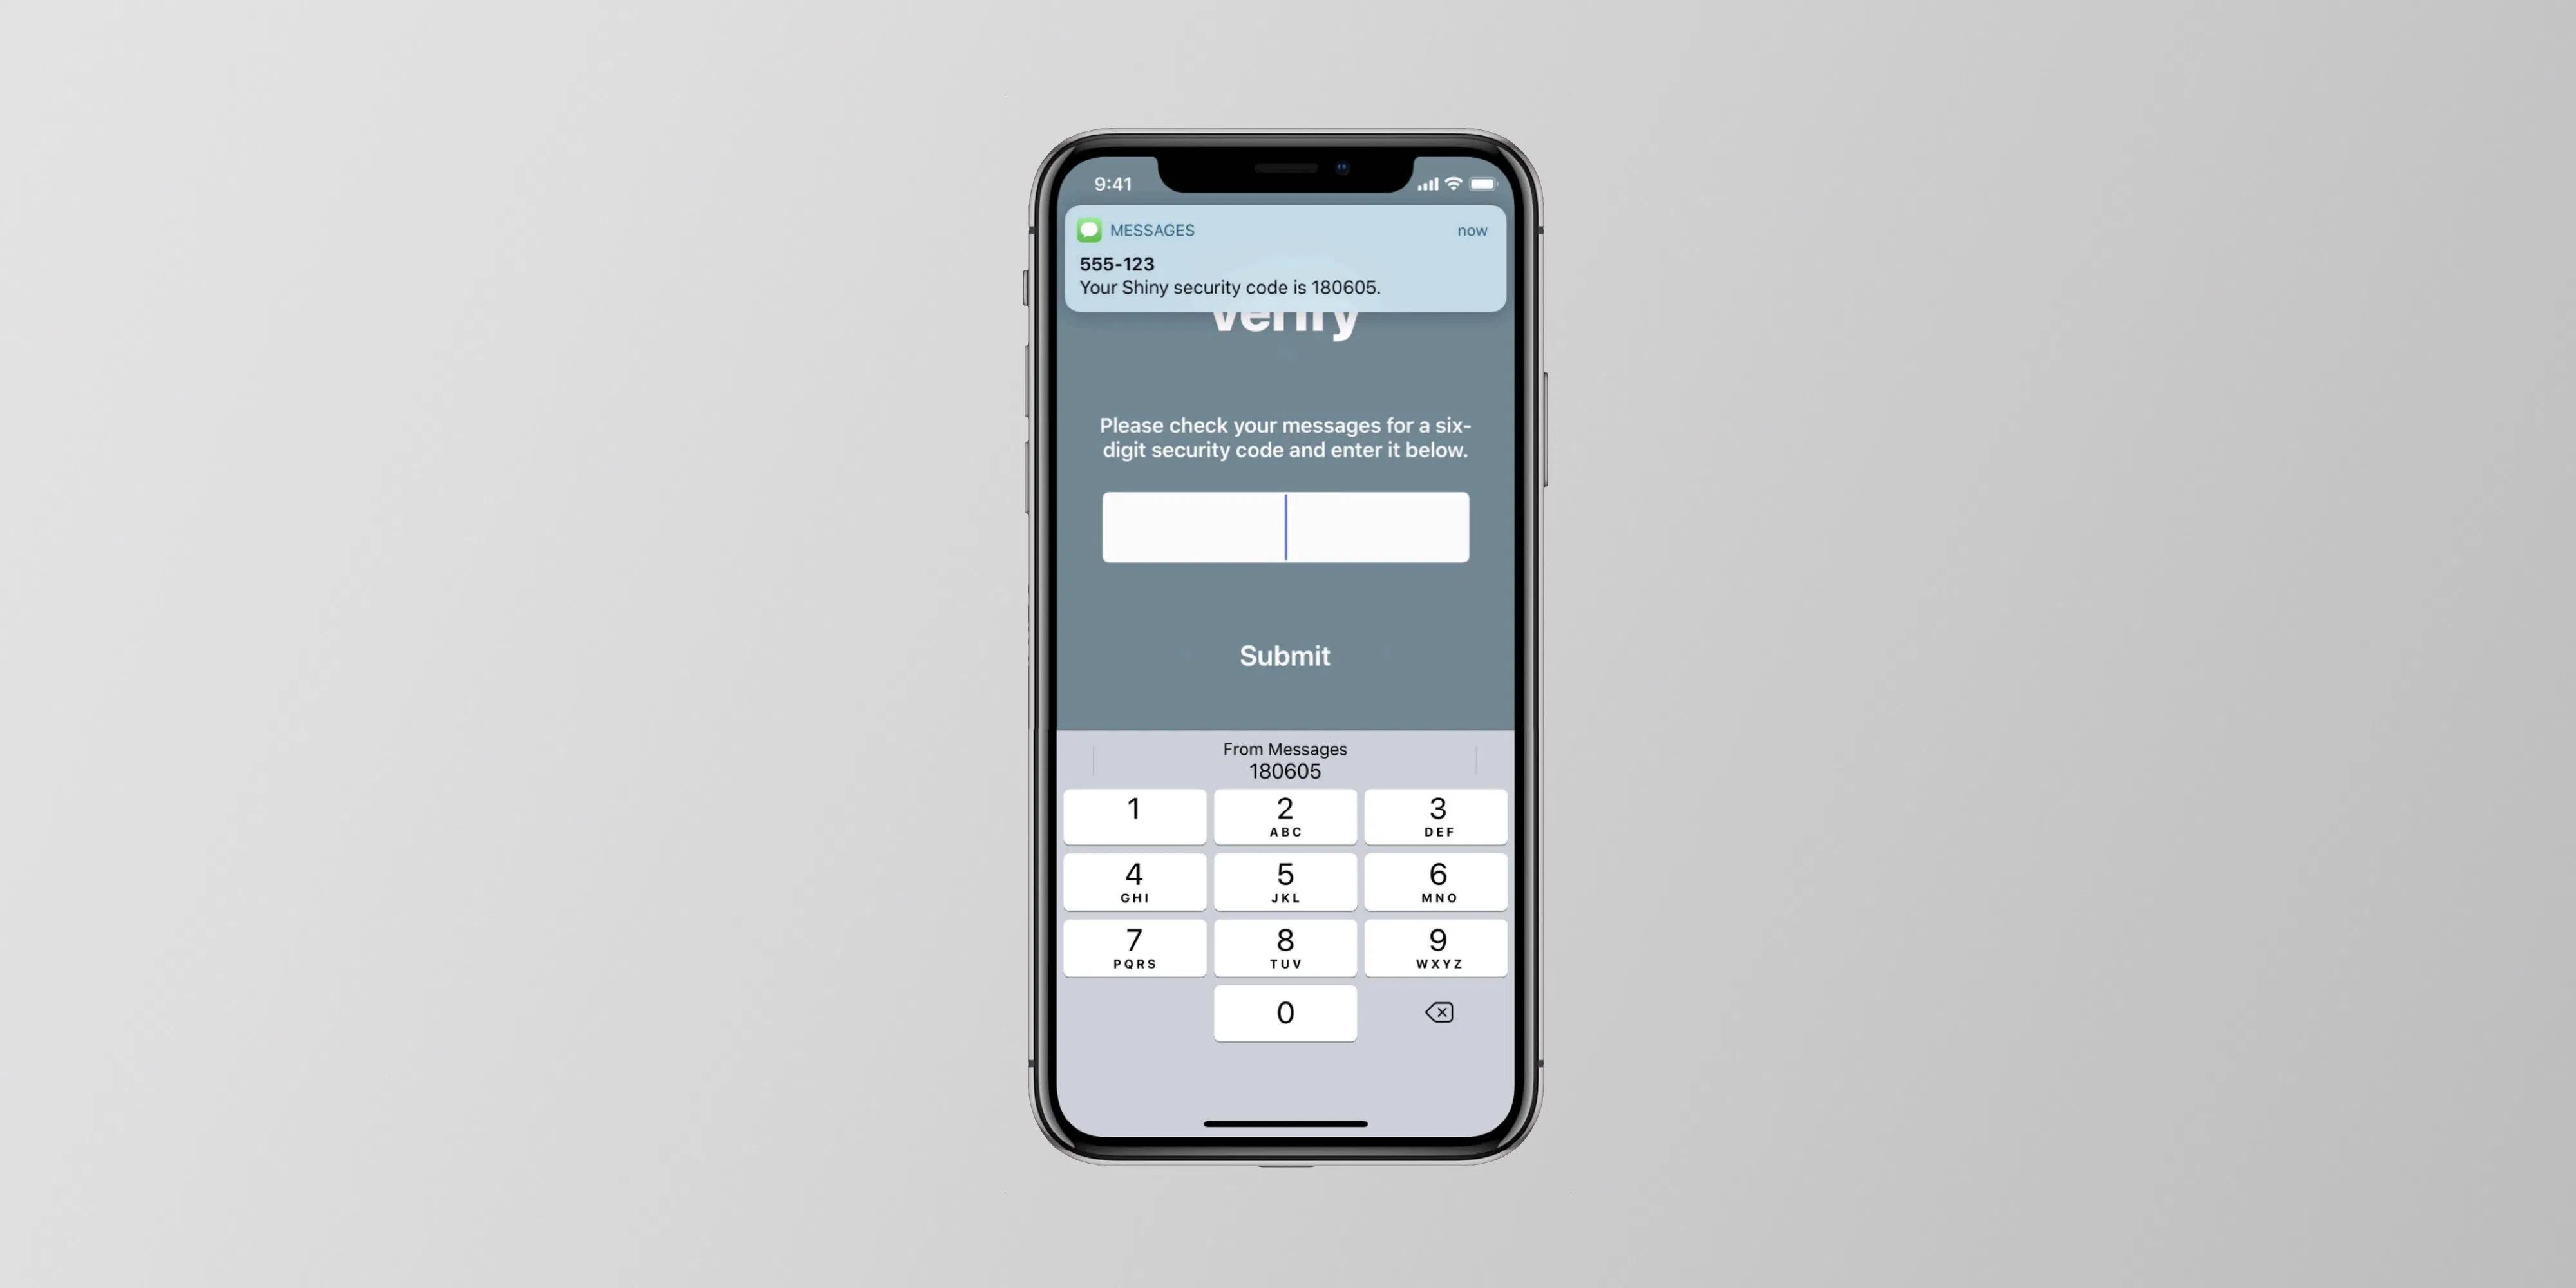 Apple Engineer Explains how the Incredibly Useful Security Code AutoFill Feature Came to be